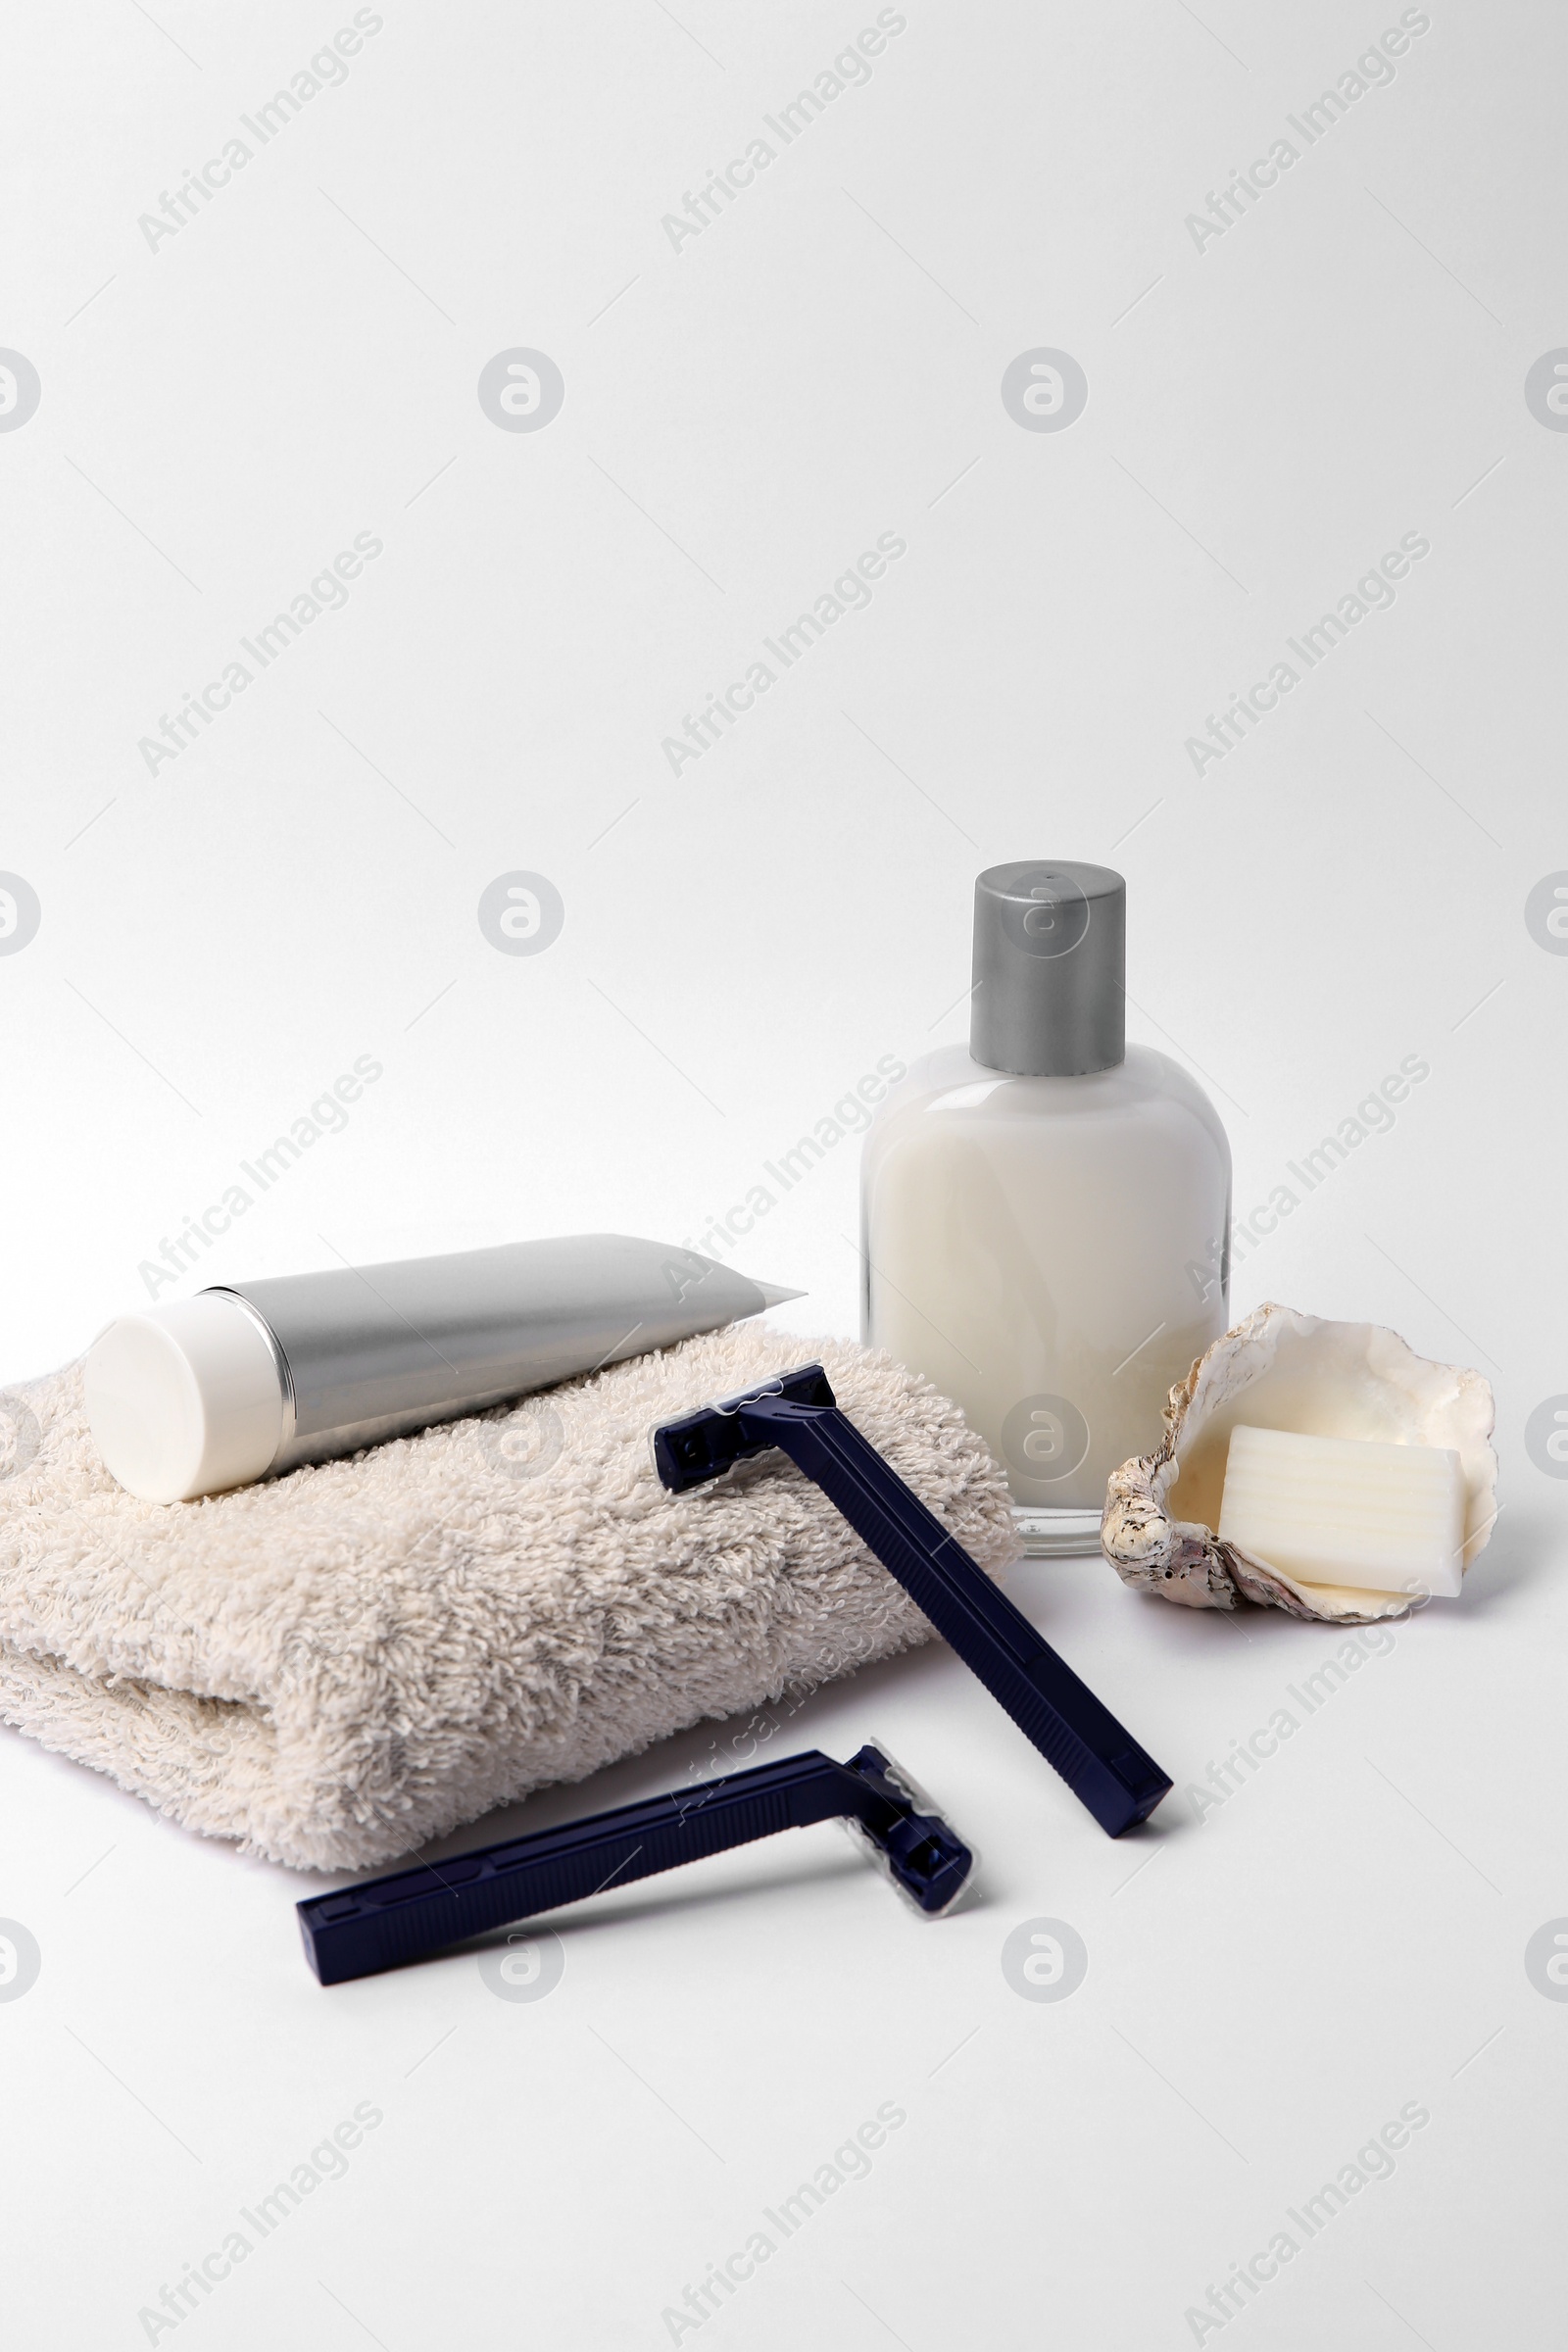 Photo of Different men's shaving accessories on white background